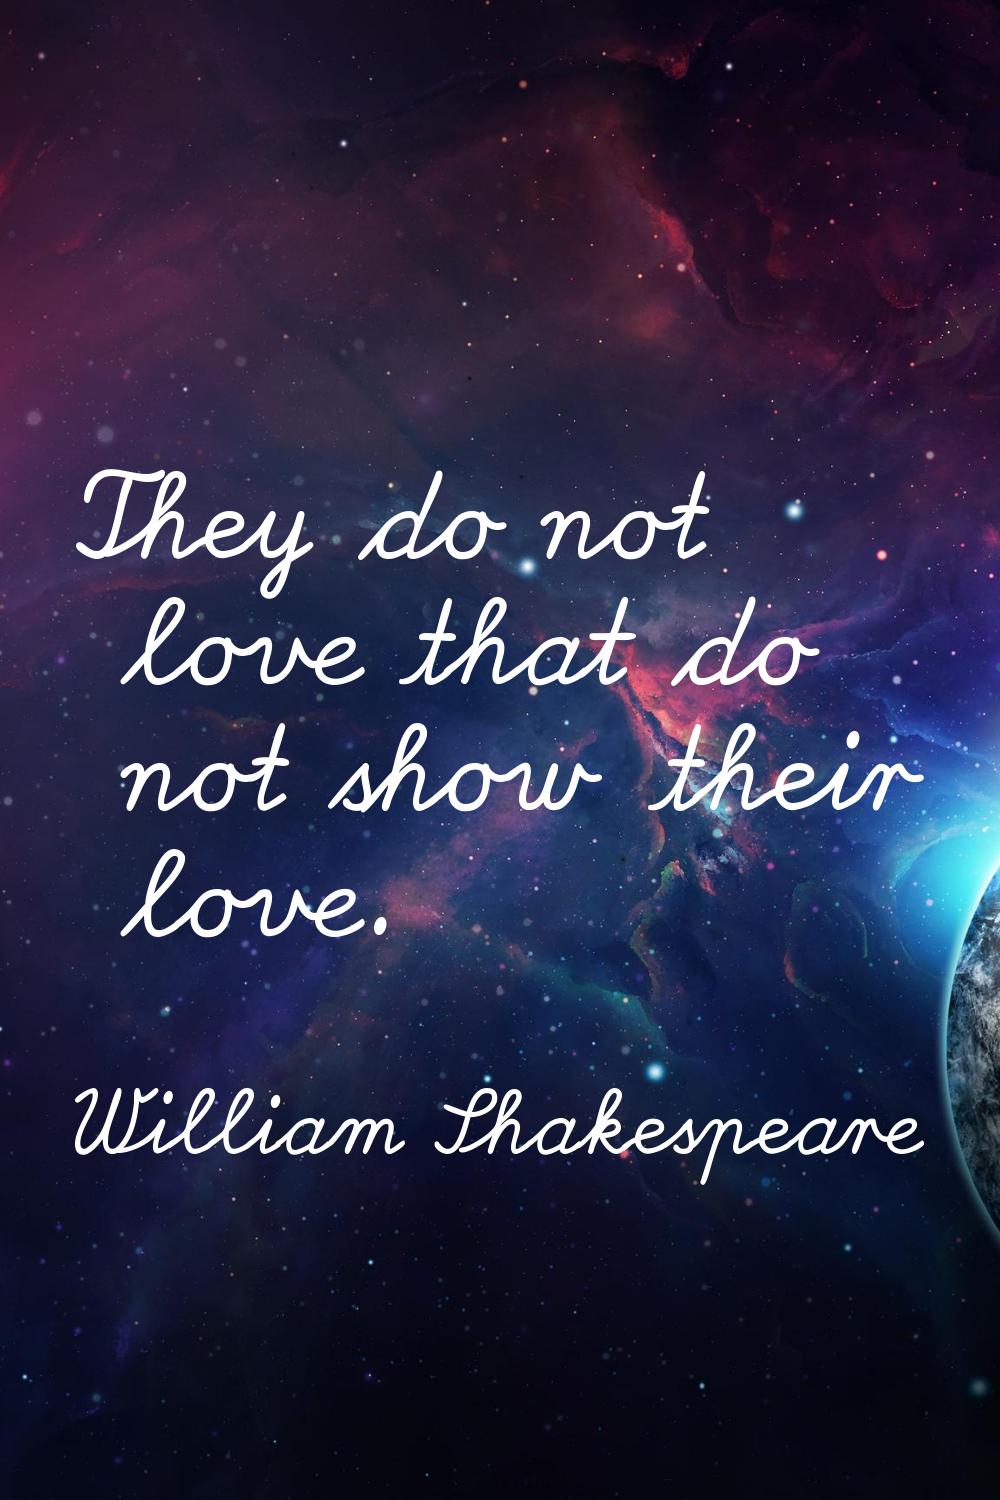 They do not love that do not show their love.